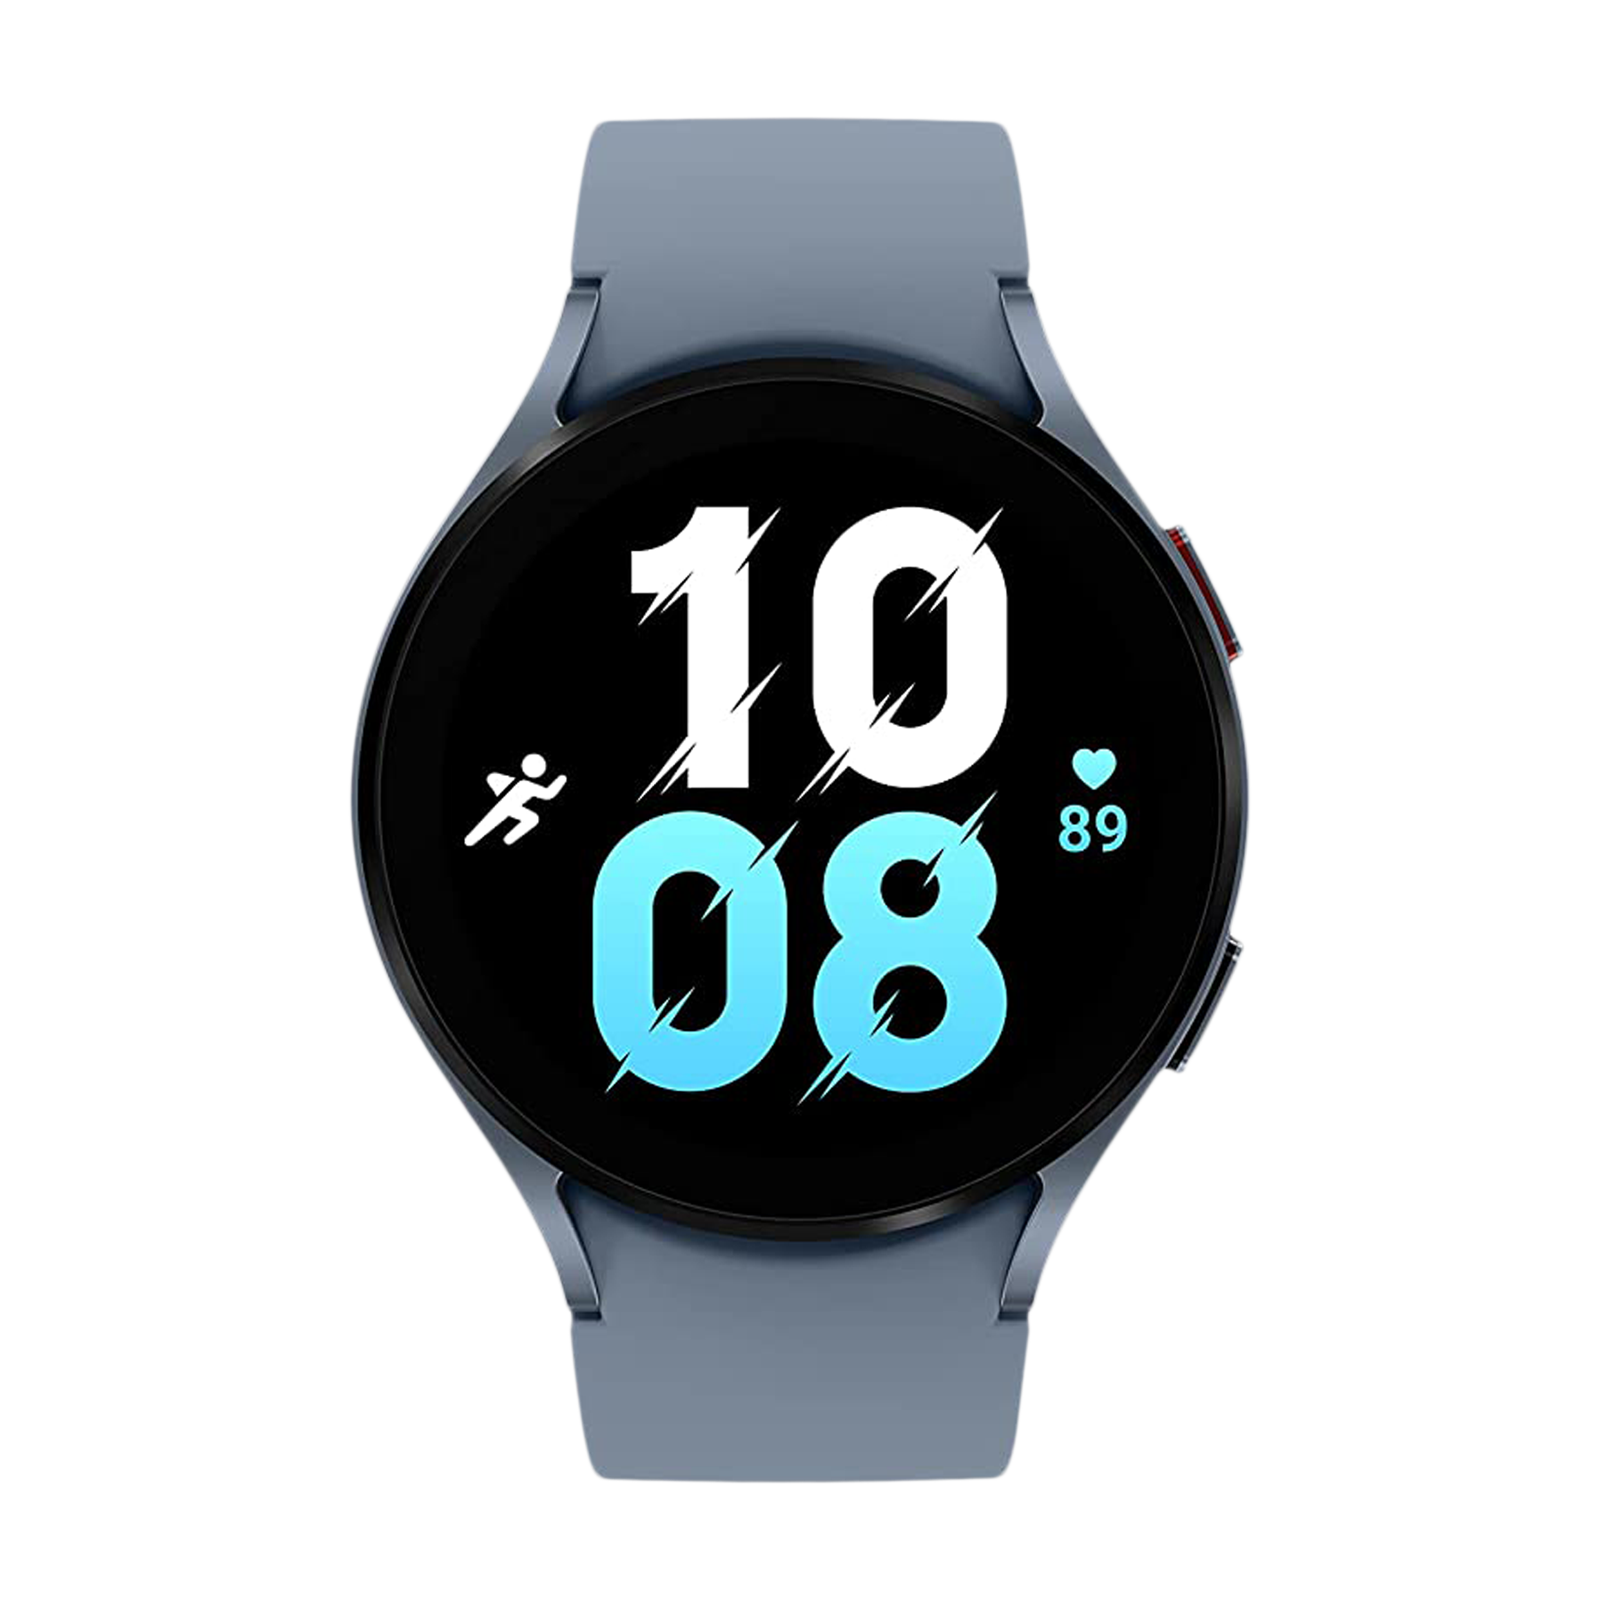 Samsung Galaxy Watch Active Online at Lowest Price in India